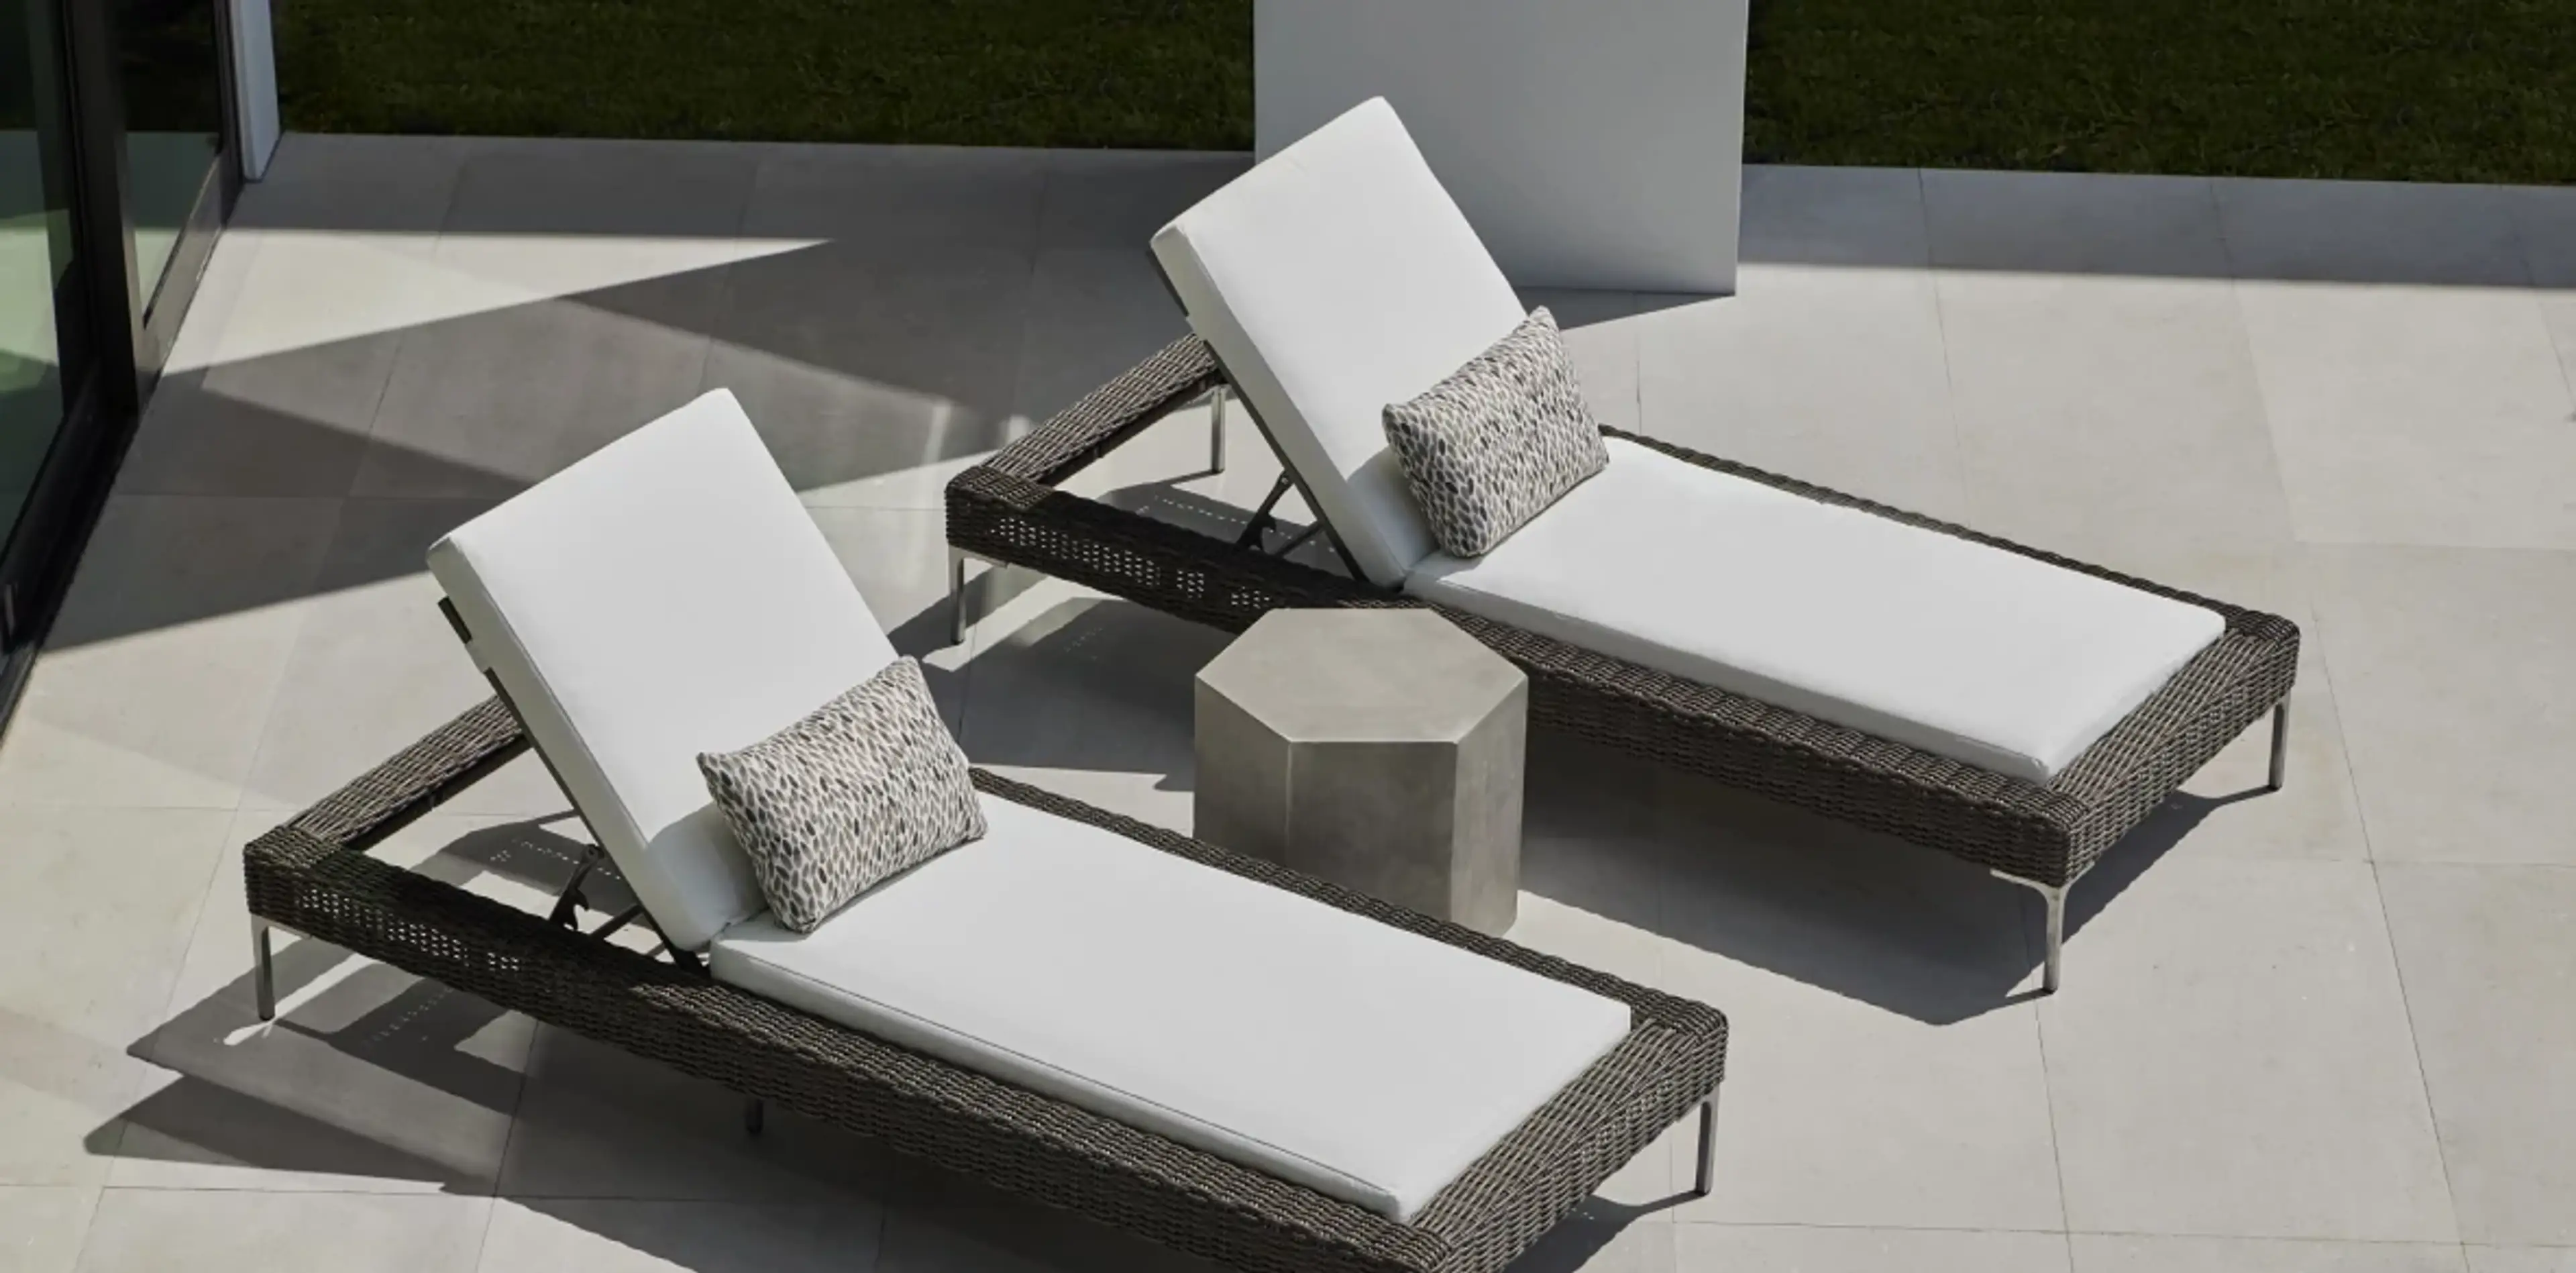 Get ready for warmer weather with outdoor furniture.